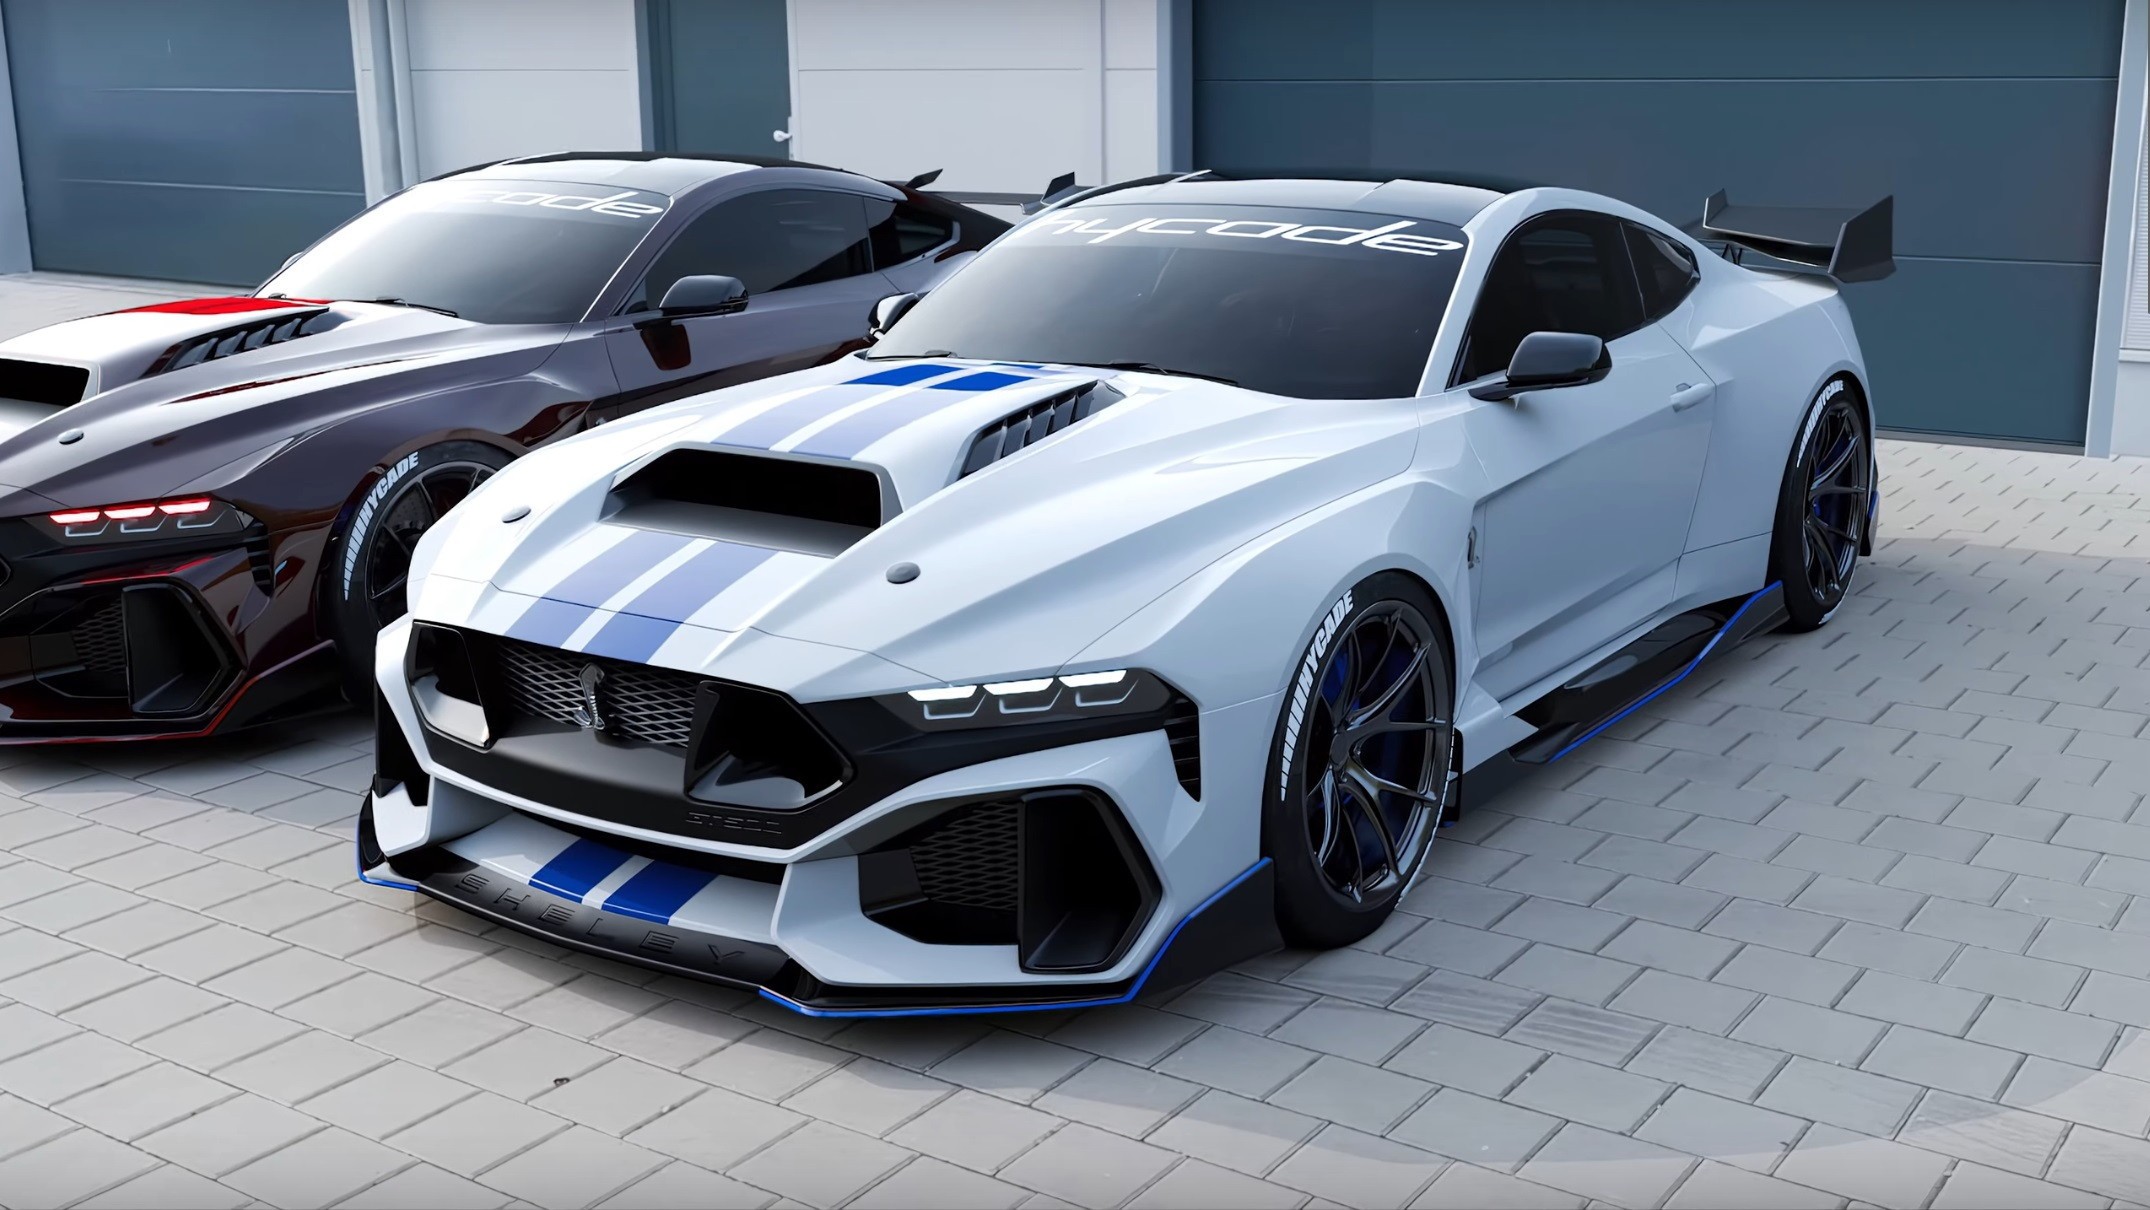 Mustang gt 2024. Ford Mustang gt 2024. Ford Mustang 2025. 2024 Ford Mustang Shelby gt500 by Hycade. Mustang 2024.